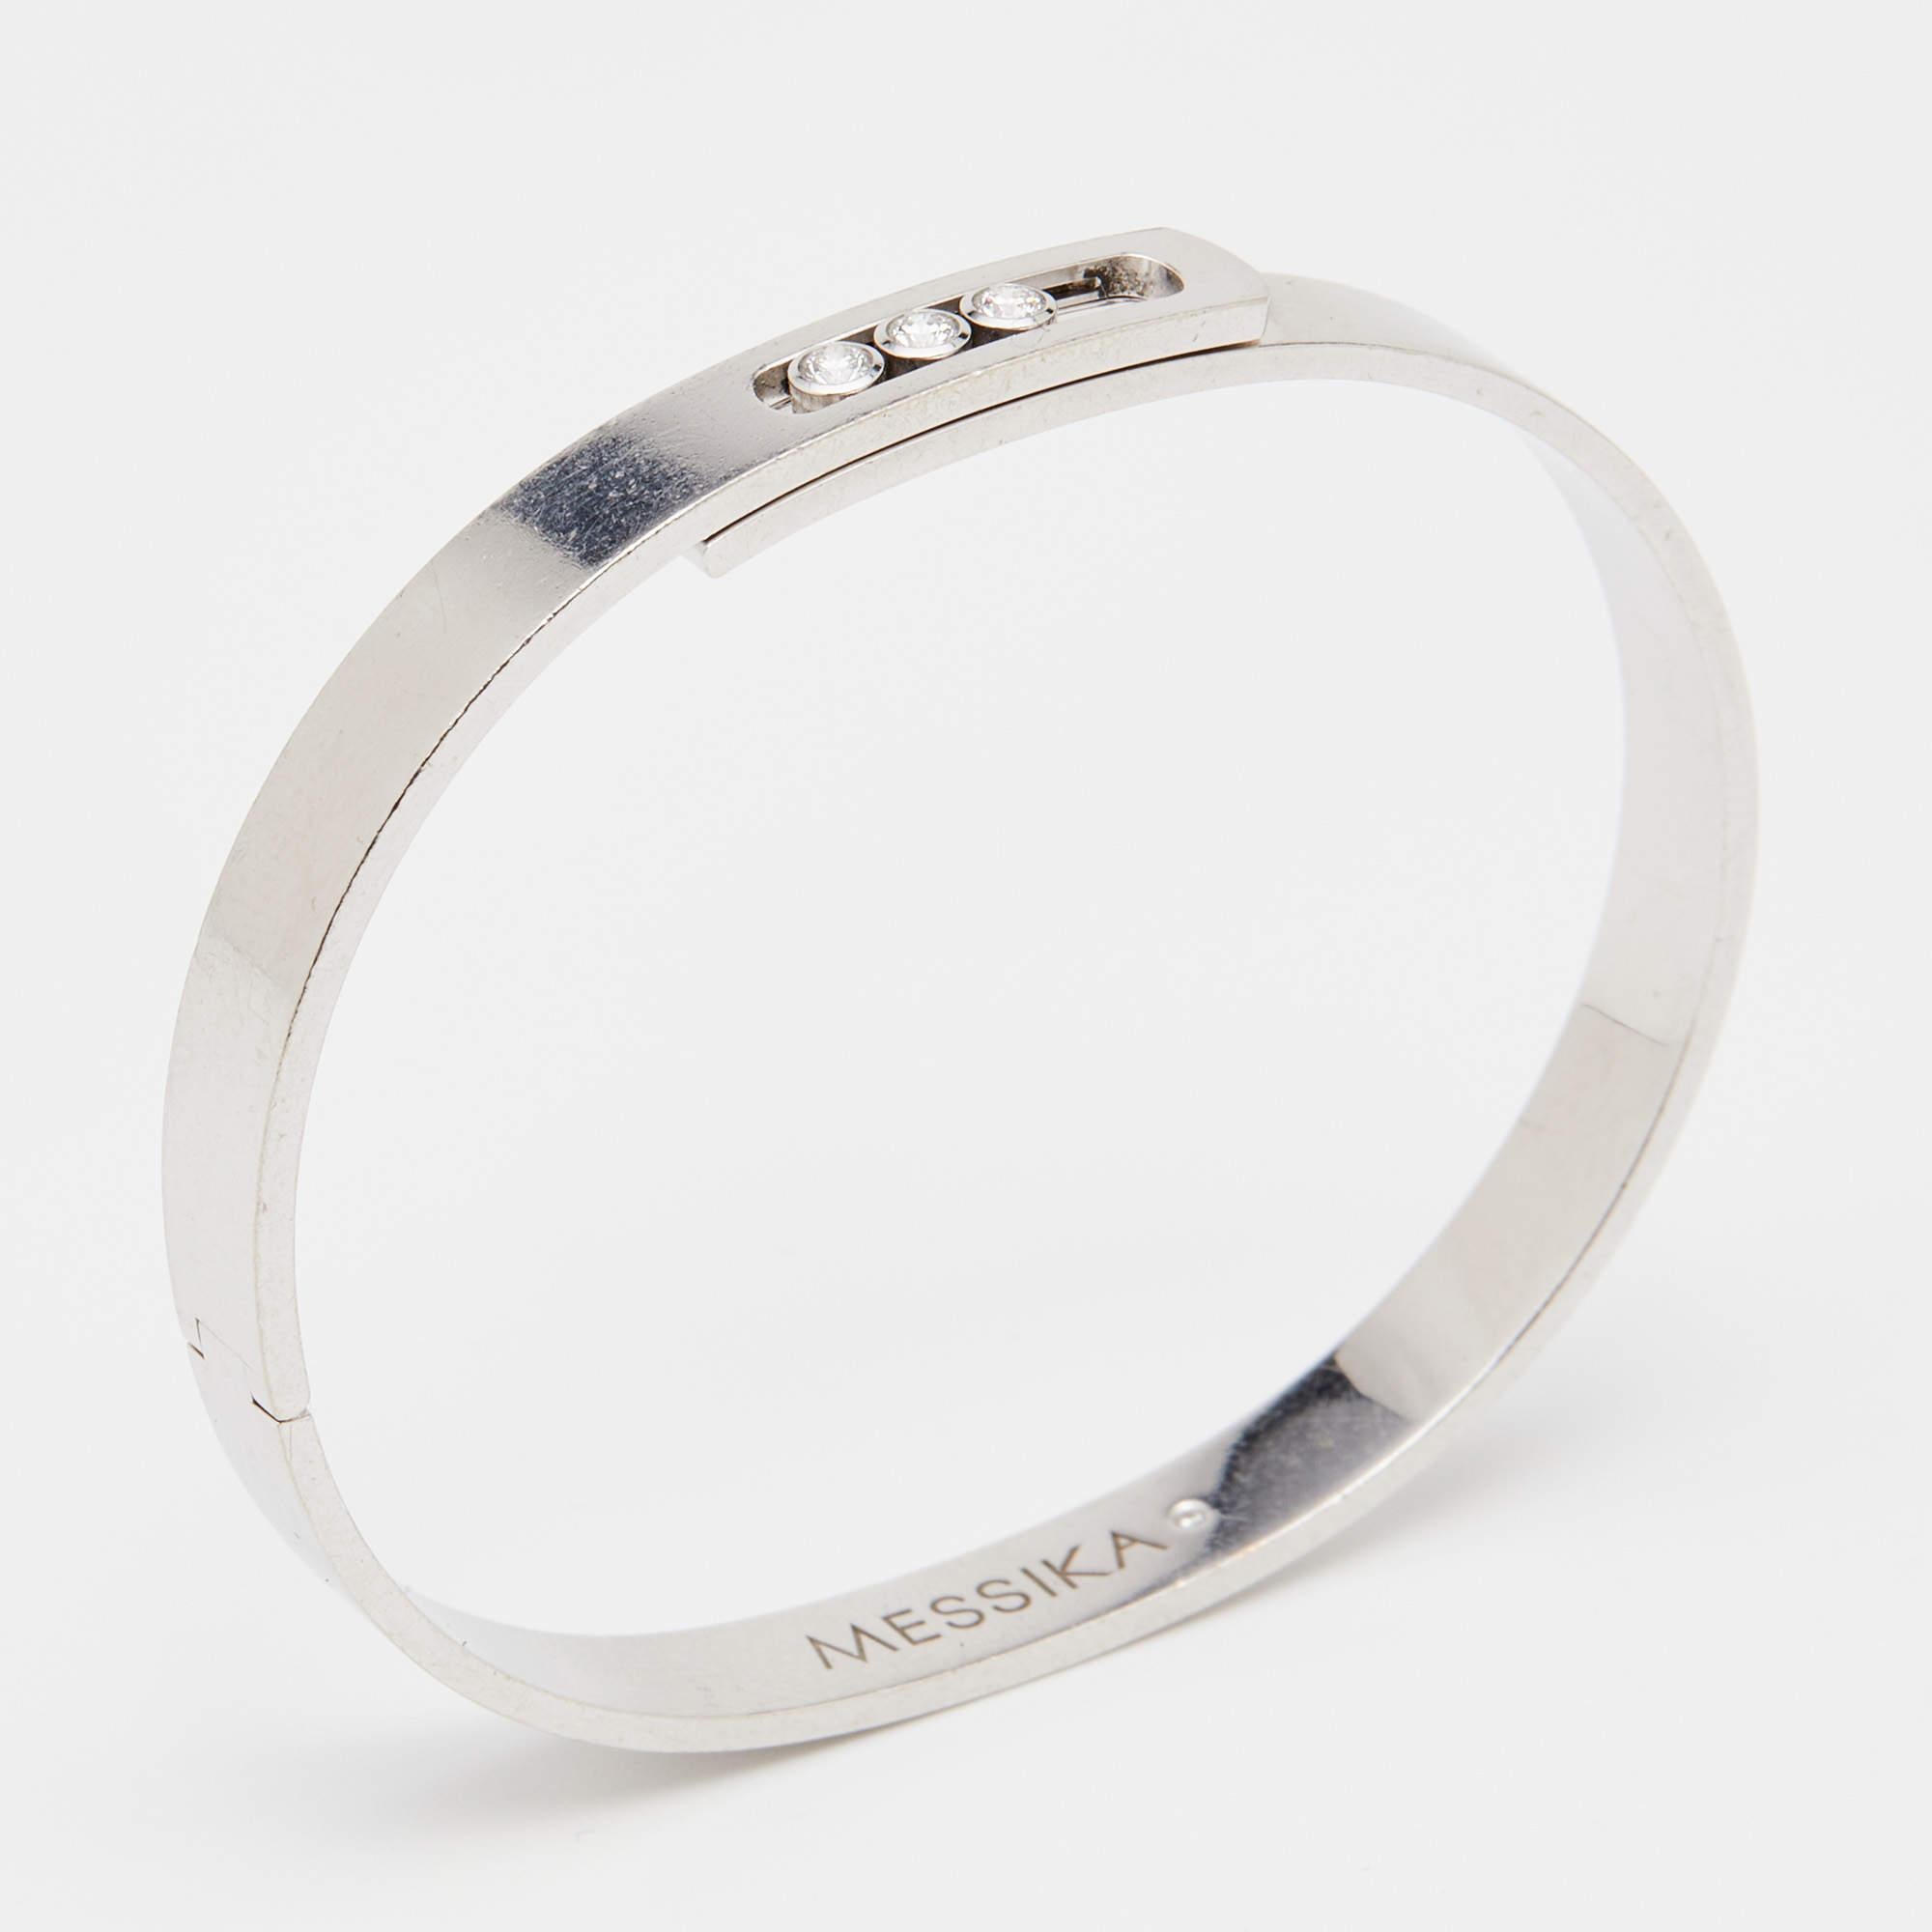 Move is an iconic collection of house Messika, a line that embodies love and romance through three moving diamonds set in simple designs. This beautiful bracelet is crafted from 18k white gold into a minimal yet timeless silhouette exuding modern